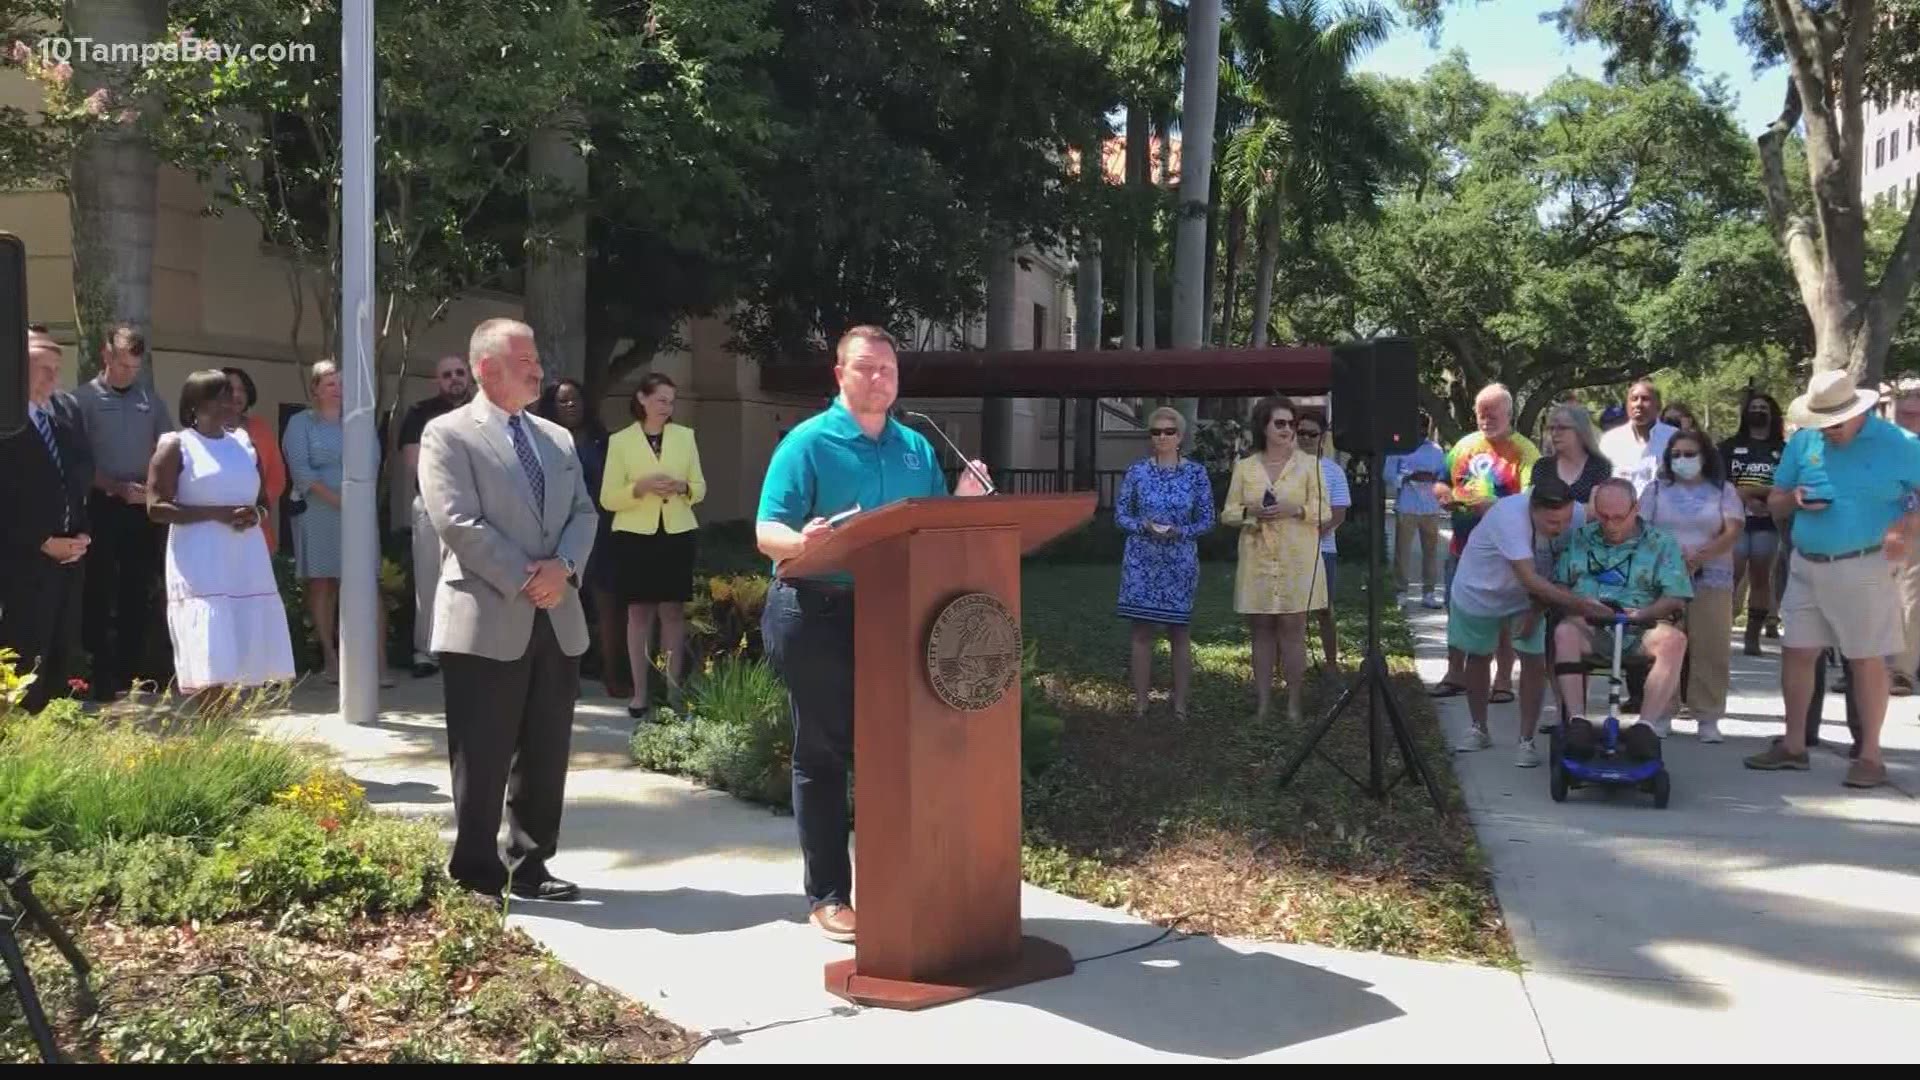 St. Petersburg Mayor Rick Kriseman said Gov. Ron DeSantis intentionally signed the controversial bill on the first day of Pride Month.